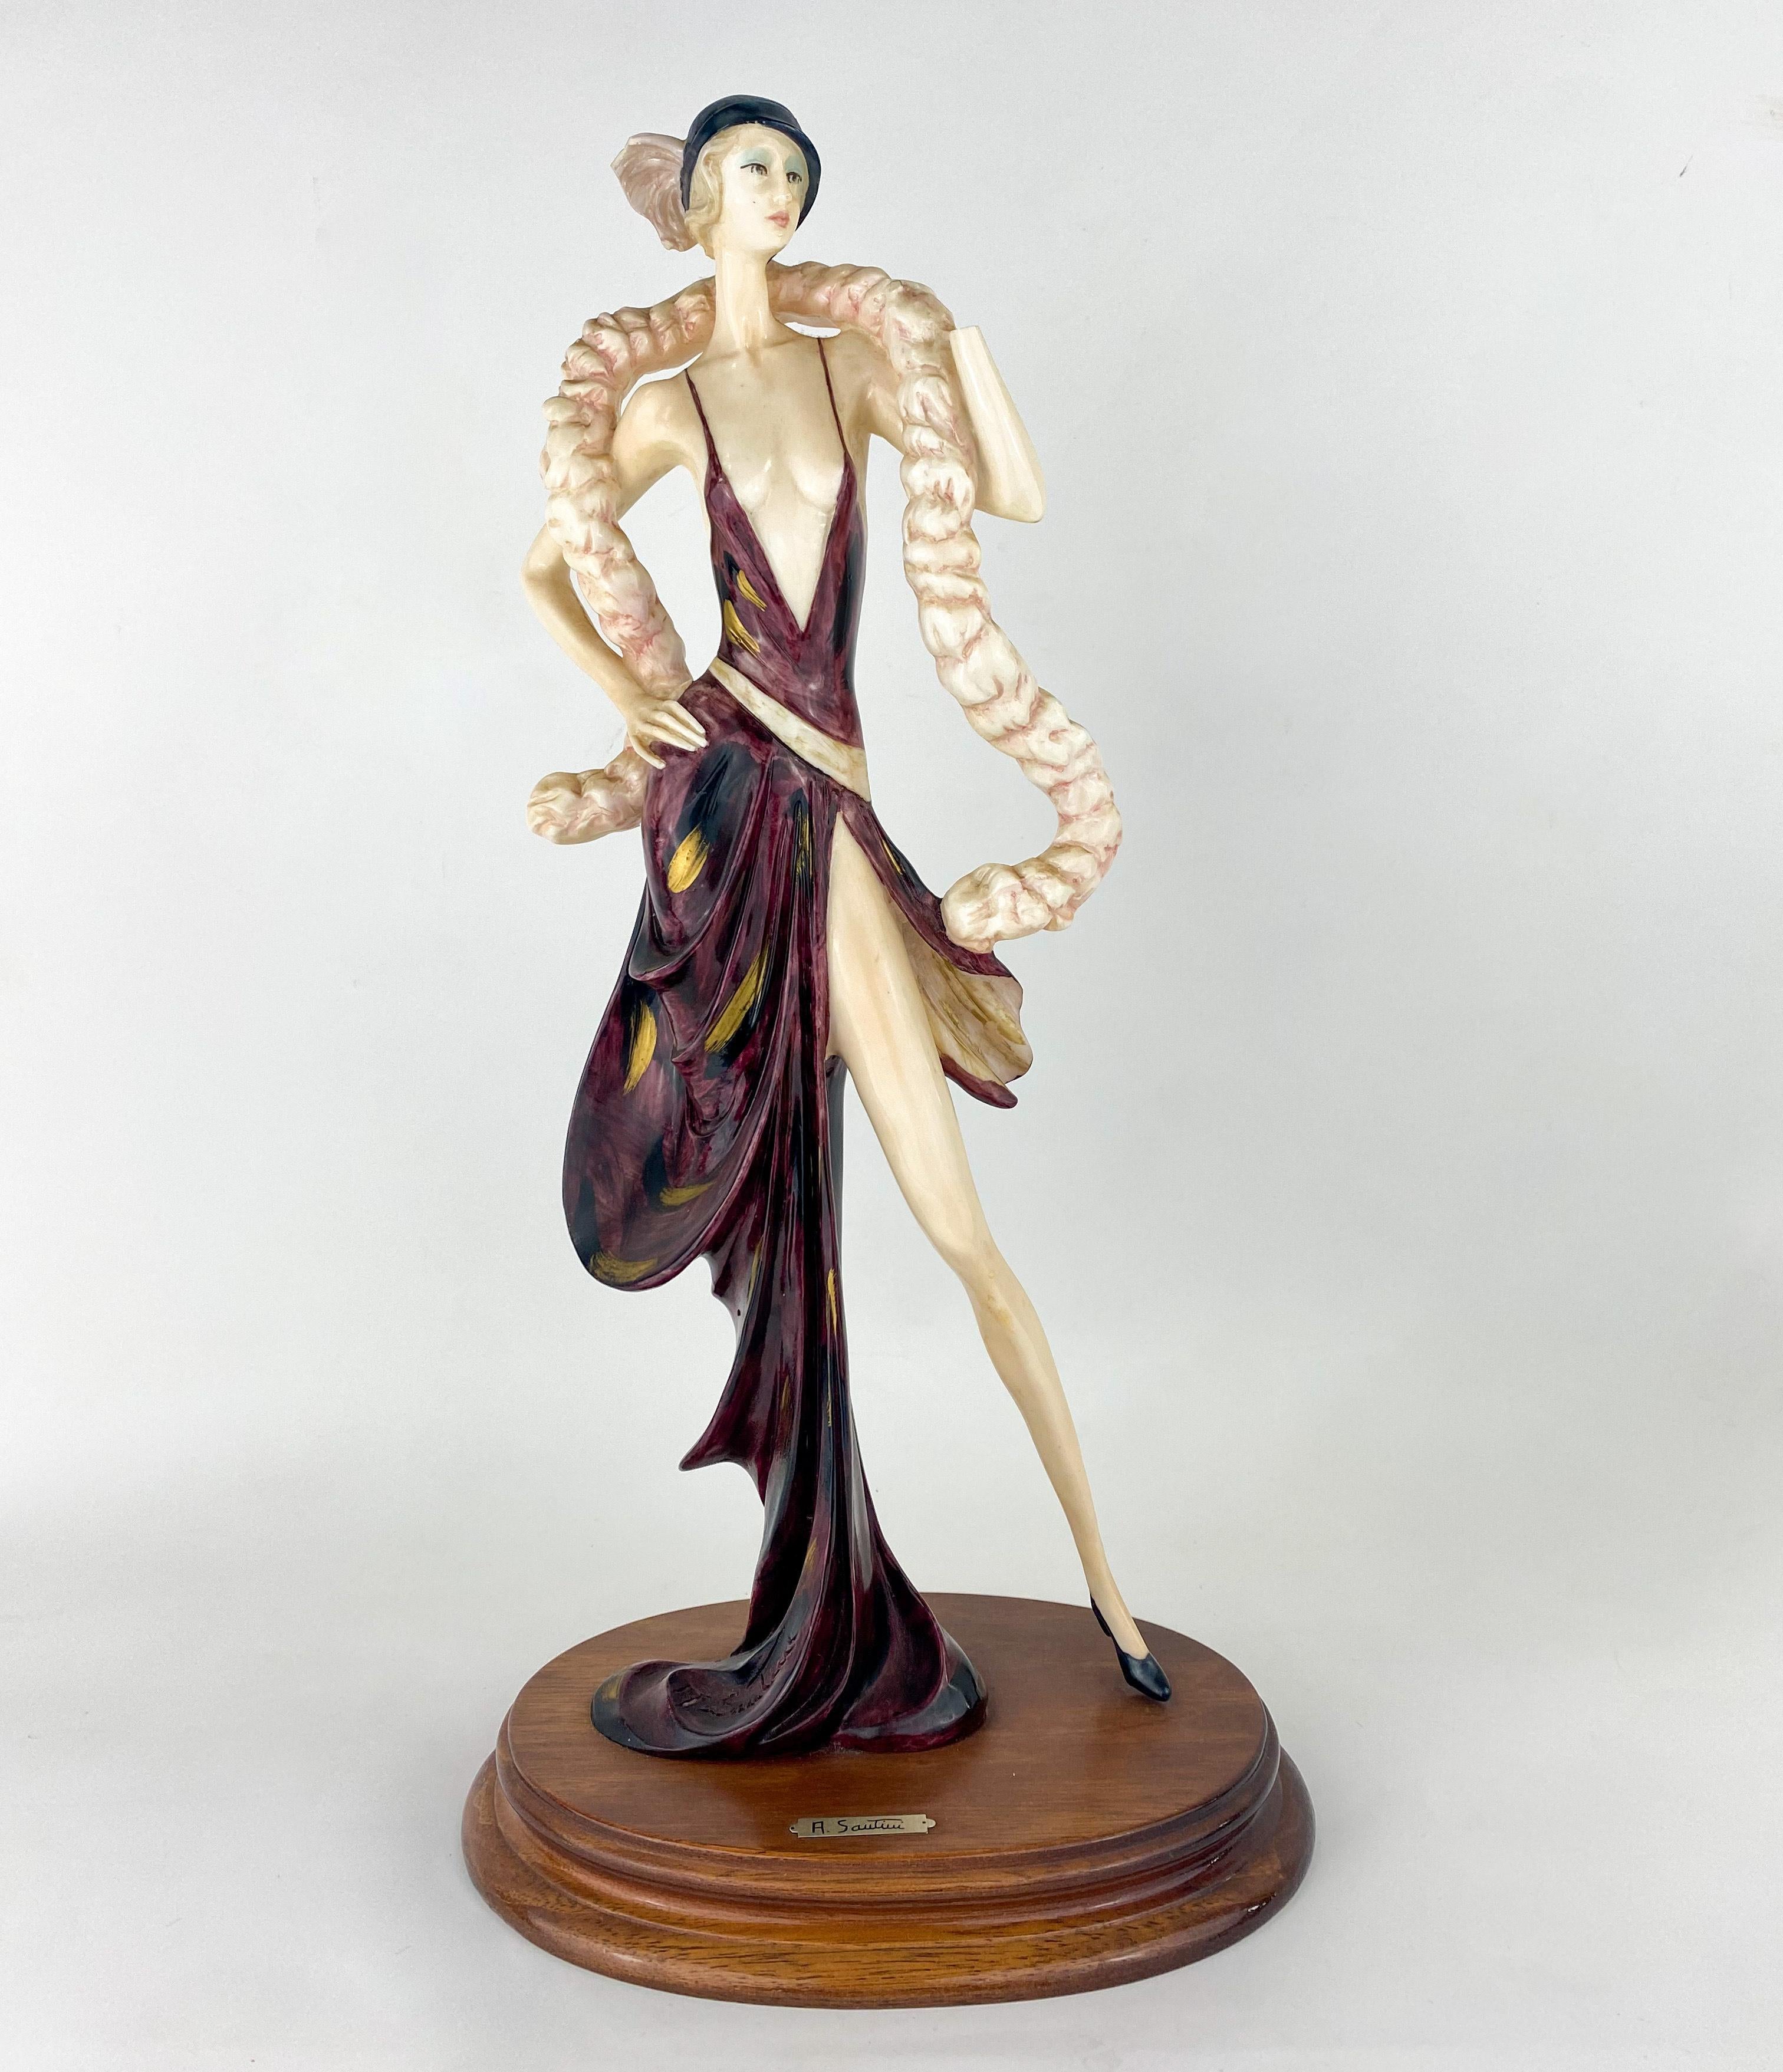 A beautiful sculpture reproduction by A. Santini after the original work of Amilcare Santini ( Italian , 1910 - 1975). The sculpture, made of Alabaster, represents an elegant lady with a long silhouette from the Art Deco era inn a festive outfit.